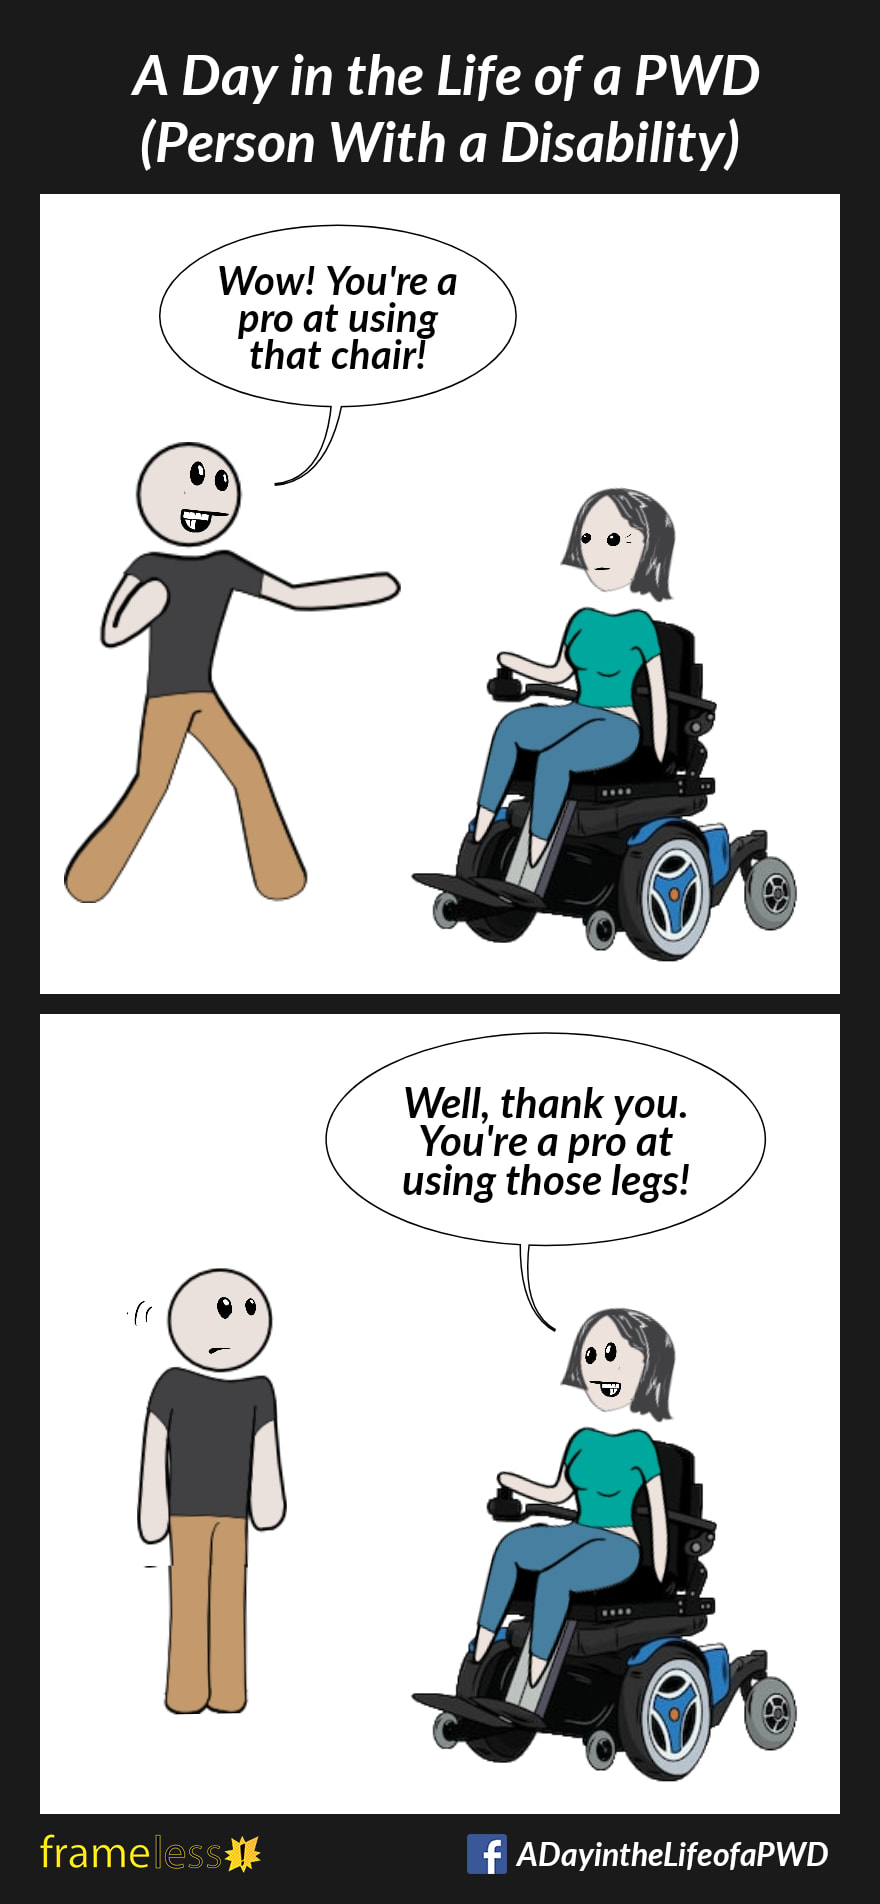 COMIC STRIP 
A Day in the Life of a PWD (Person With a Disability) 

Frame 1:
A woman in a power wheelchair is approached by a stranger. 
STRANGER: Wow! You're a pro at using that chair!

Frame 2:
WOMAN: Well, thank you. You're a pro at using those legs!